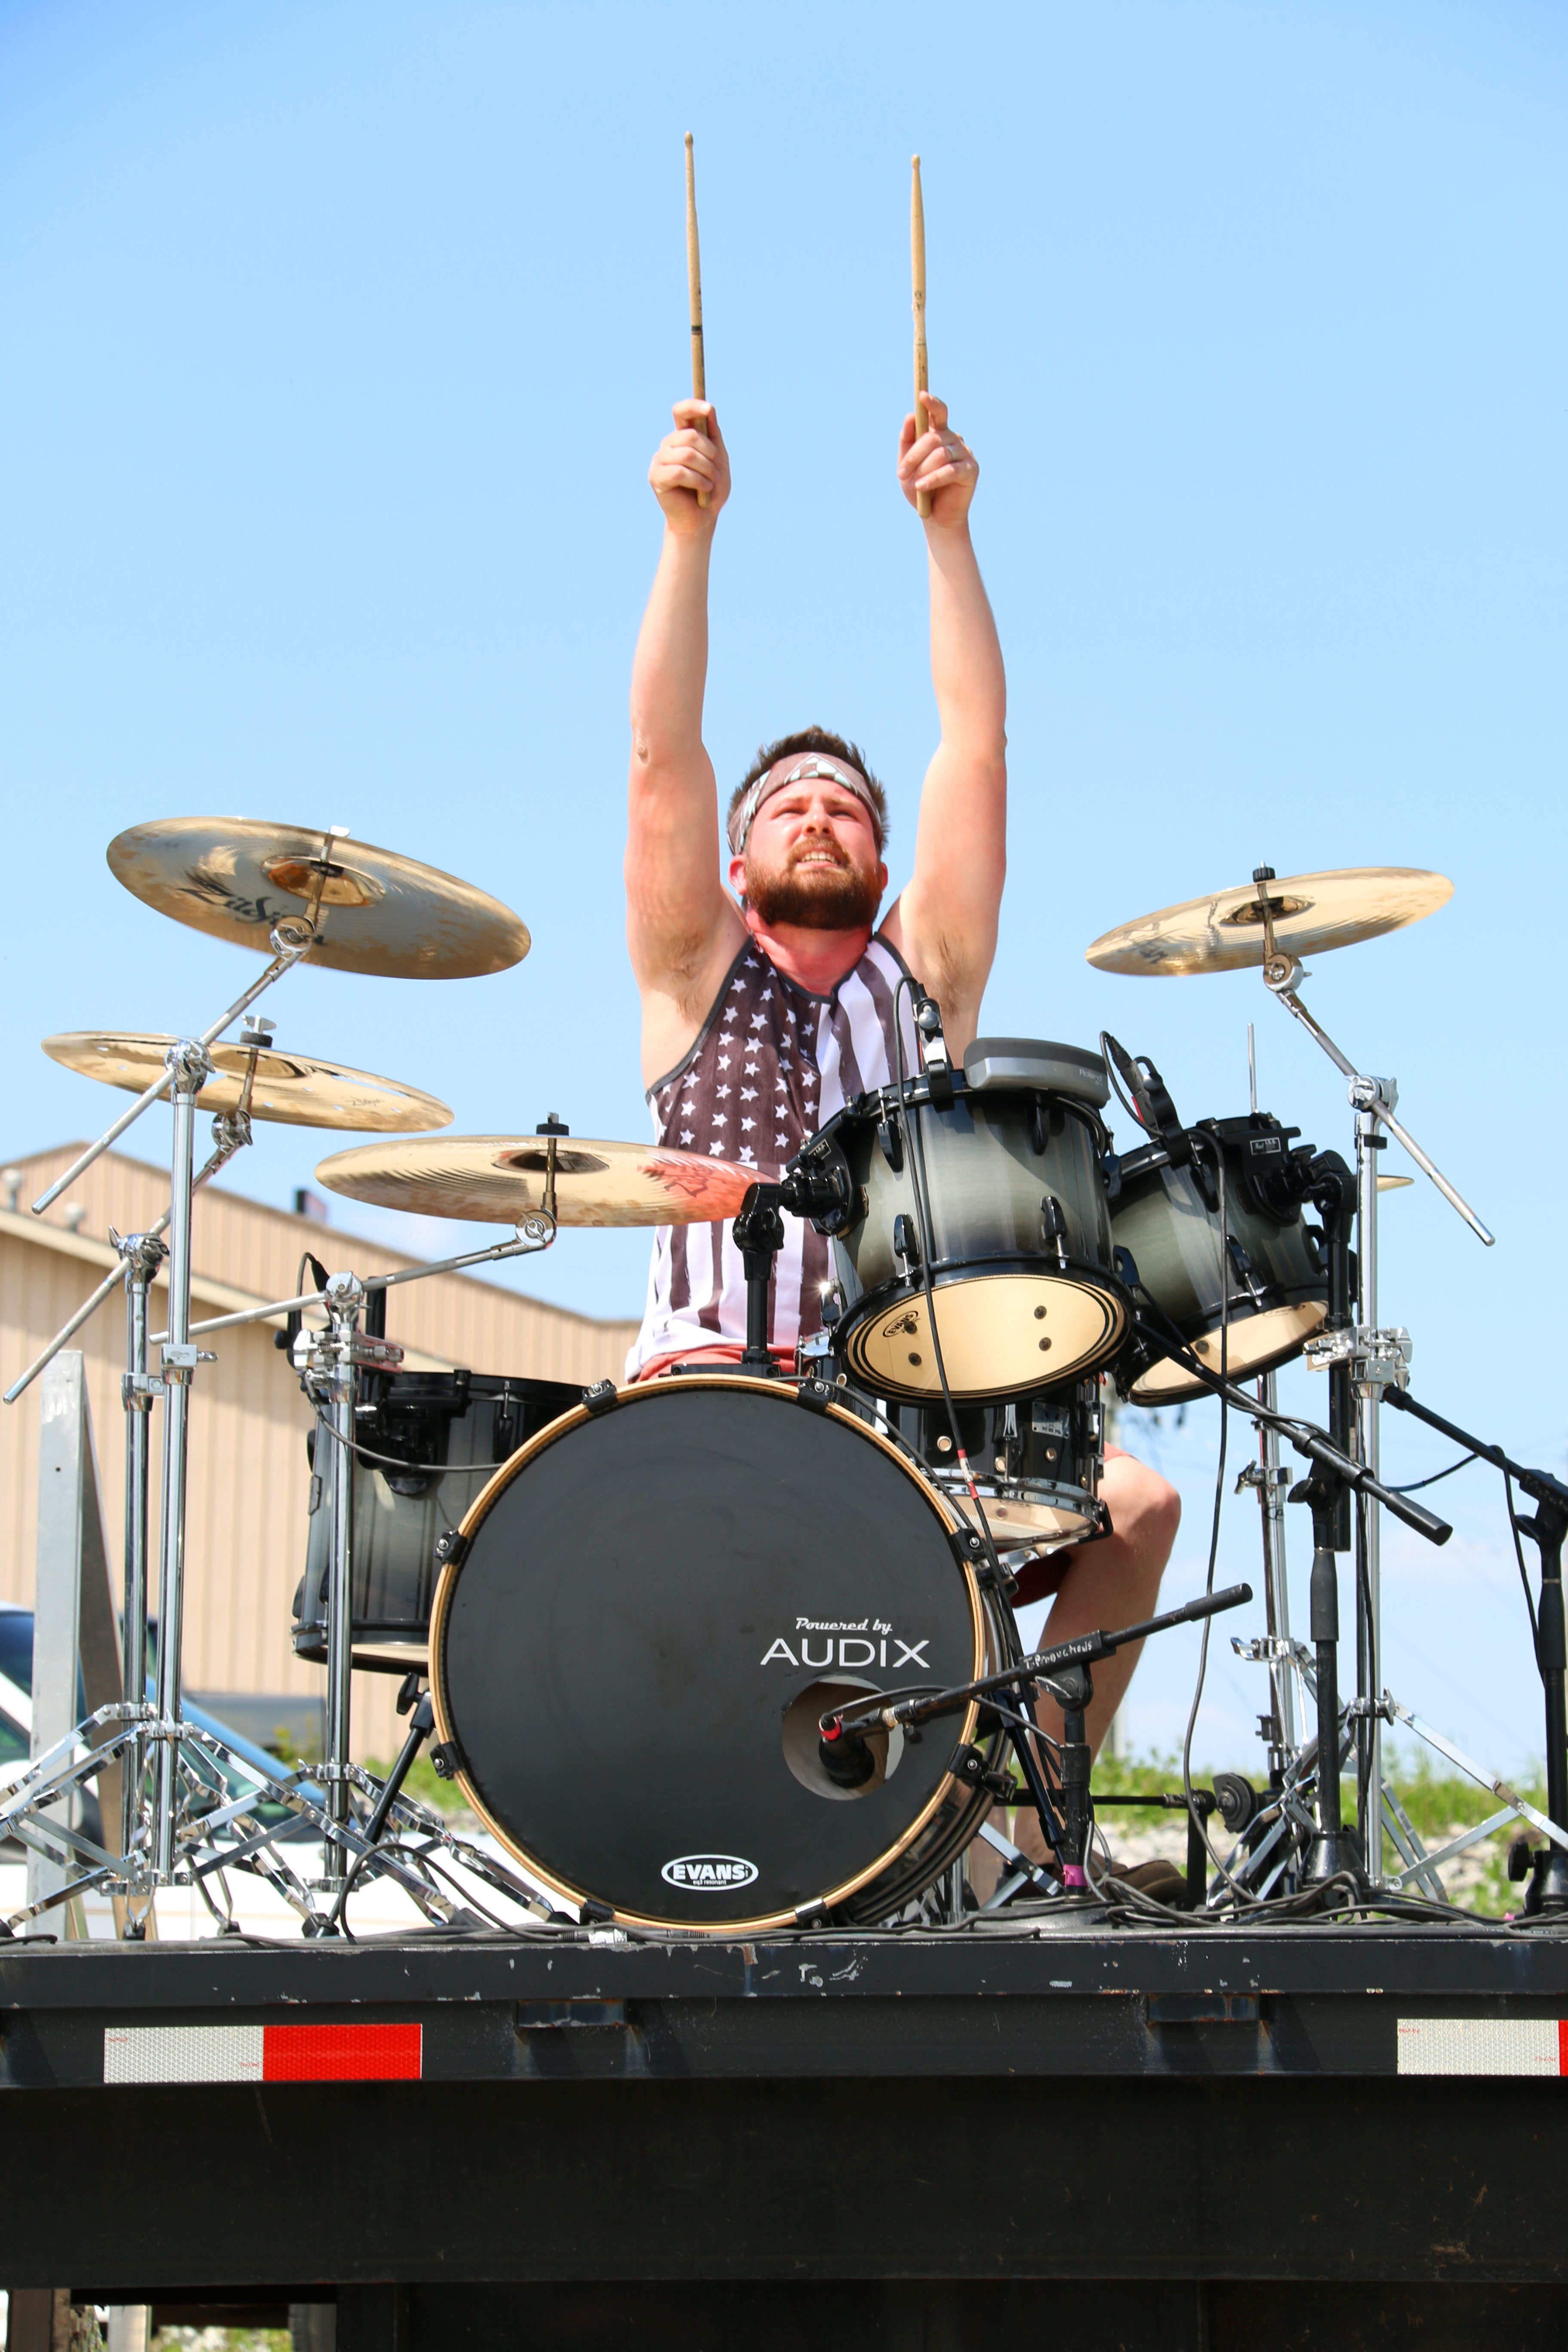 Anthony Decker, the drummer for Three Ciities, playing at Brandt's I-69 Harley Davidson in Marion, IN